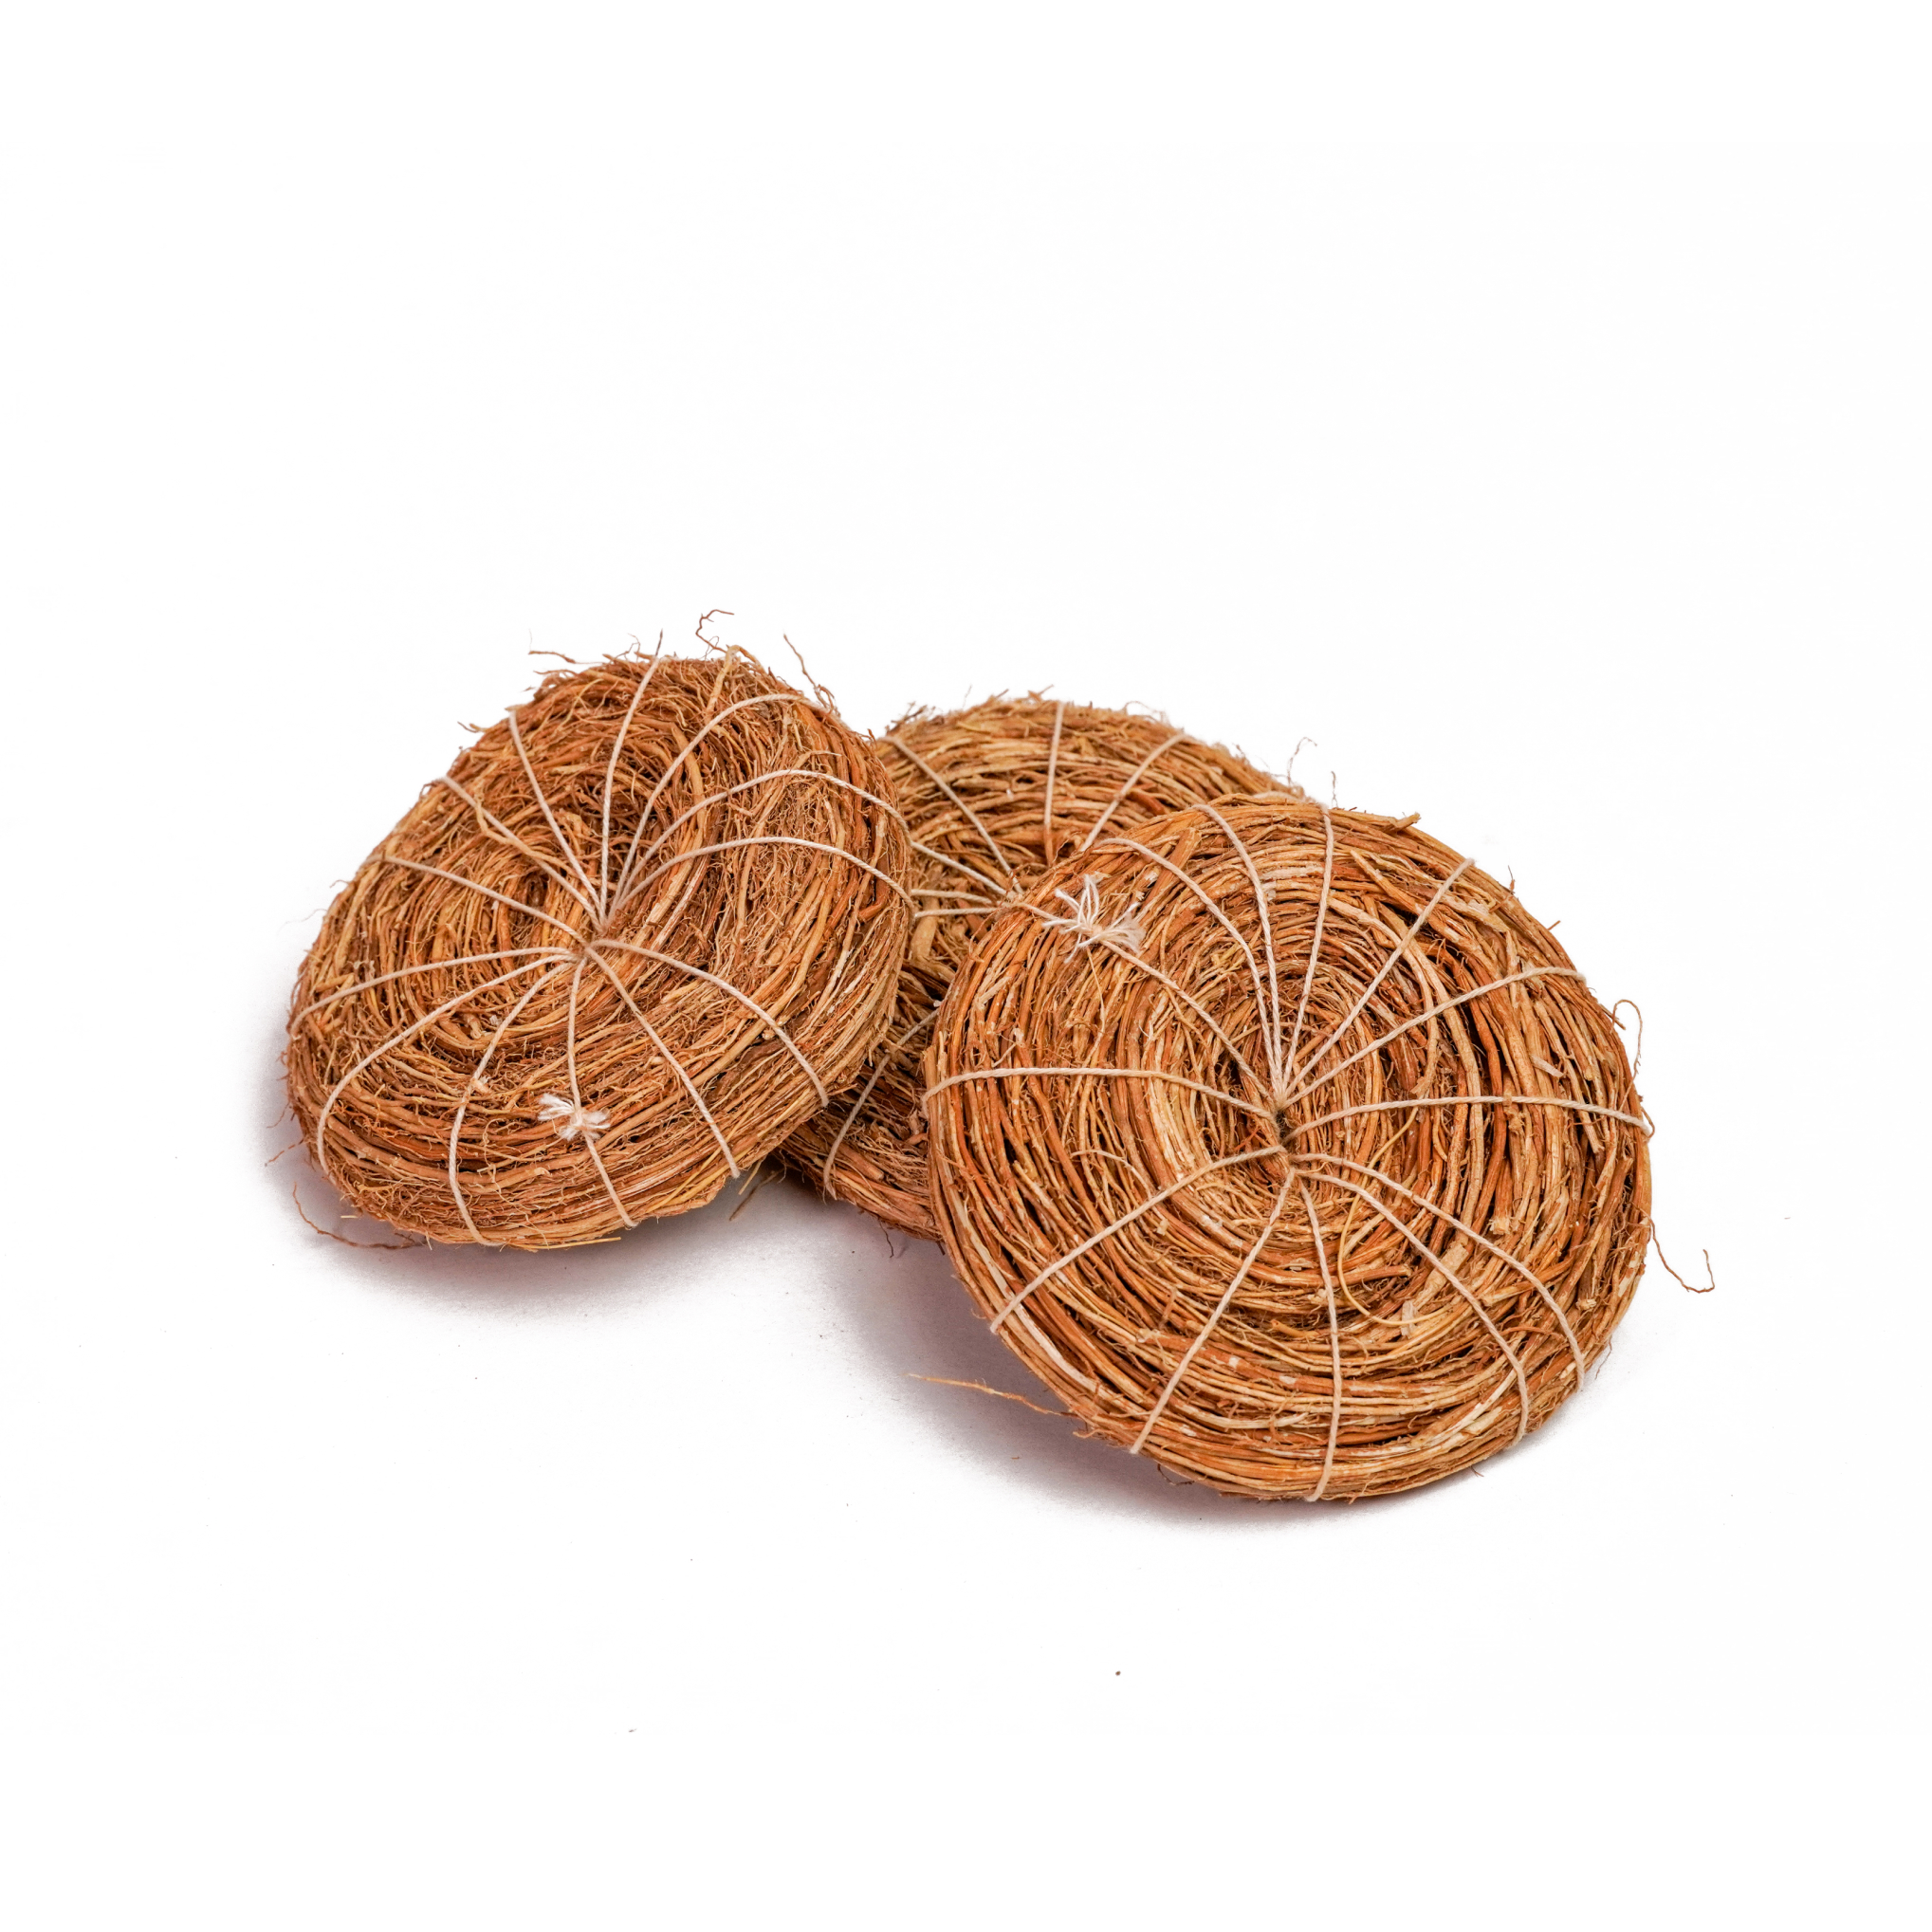 Buy Ecotyl Vetiver Scrubber (Natural Loofah) - Set of 3 at Best Price Online